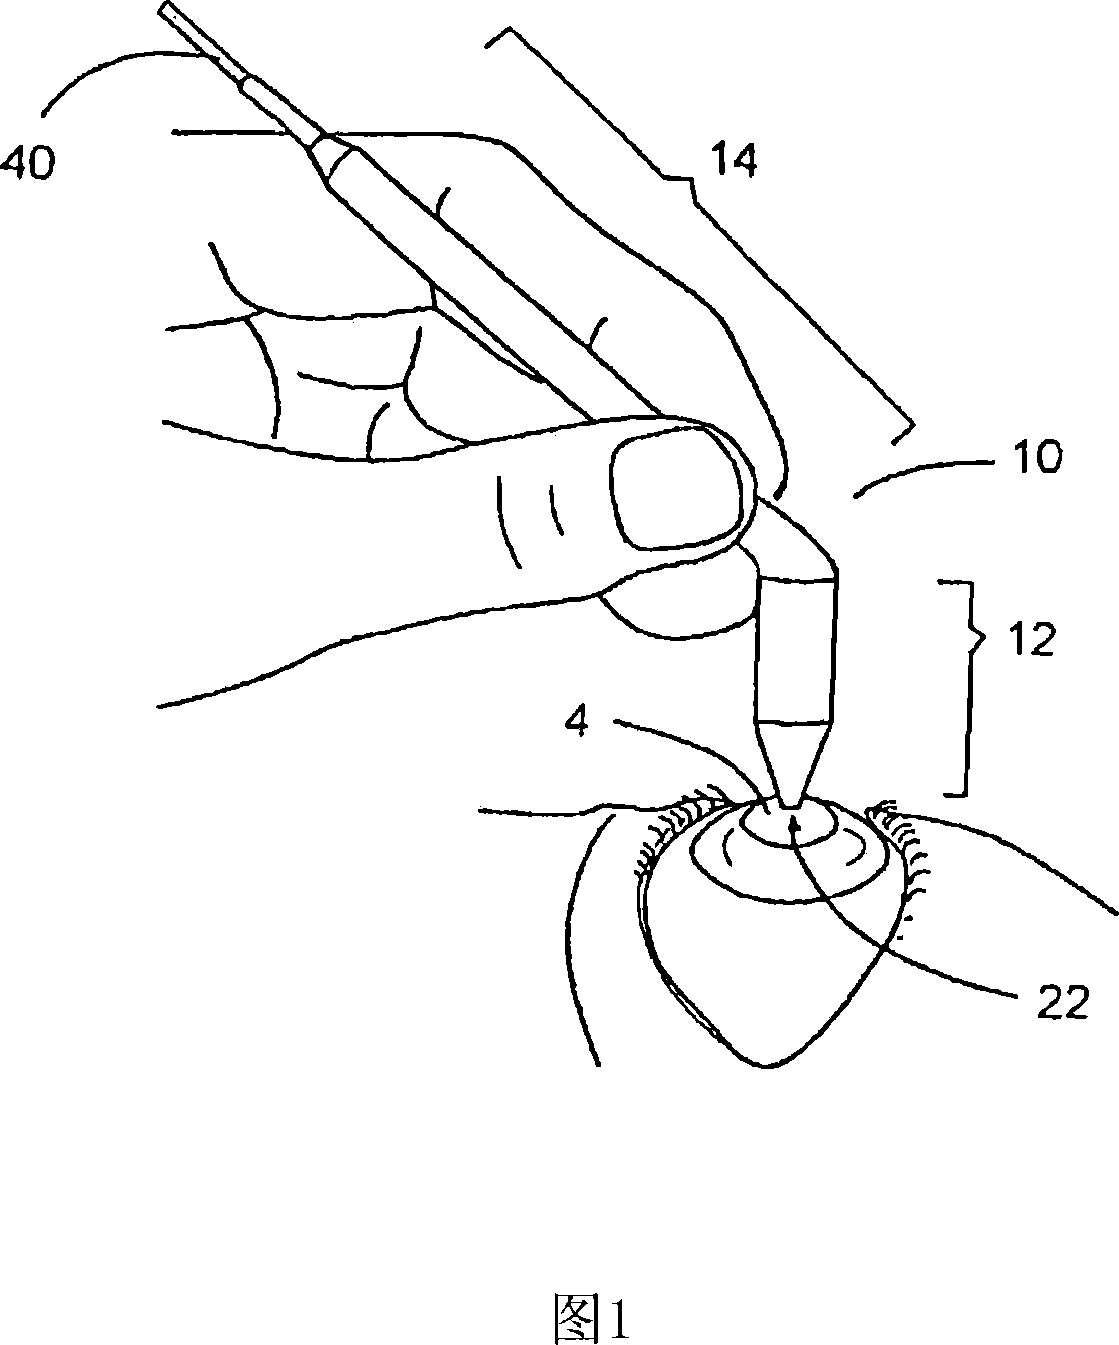 Improved apparatus and method of intraocular pressure determination